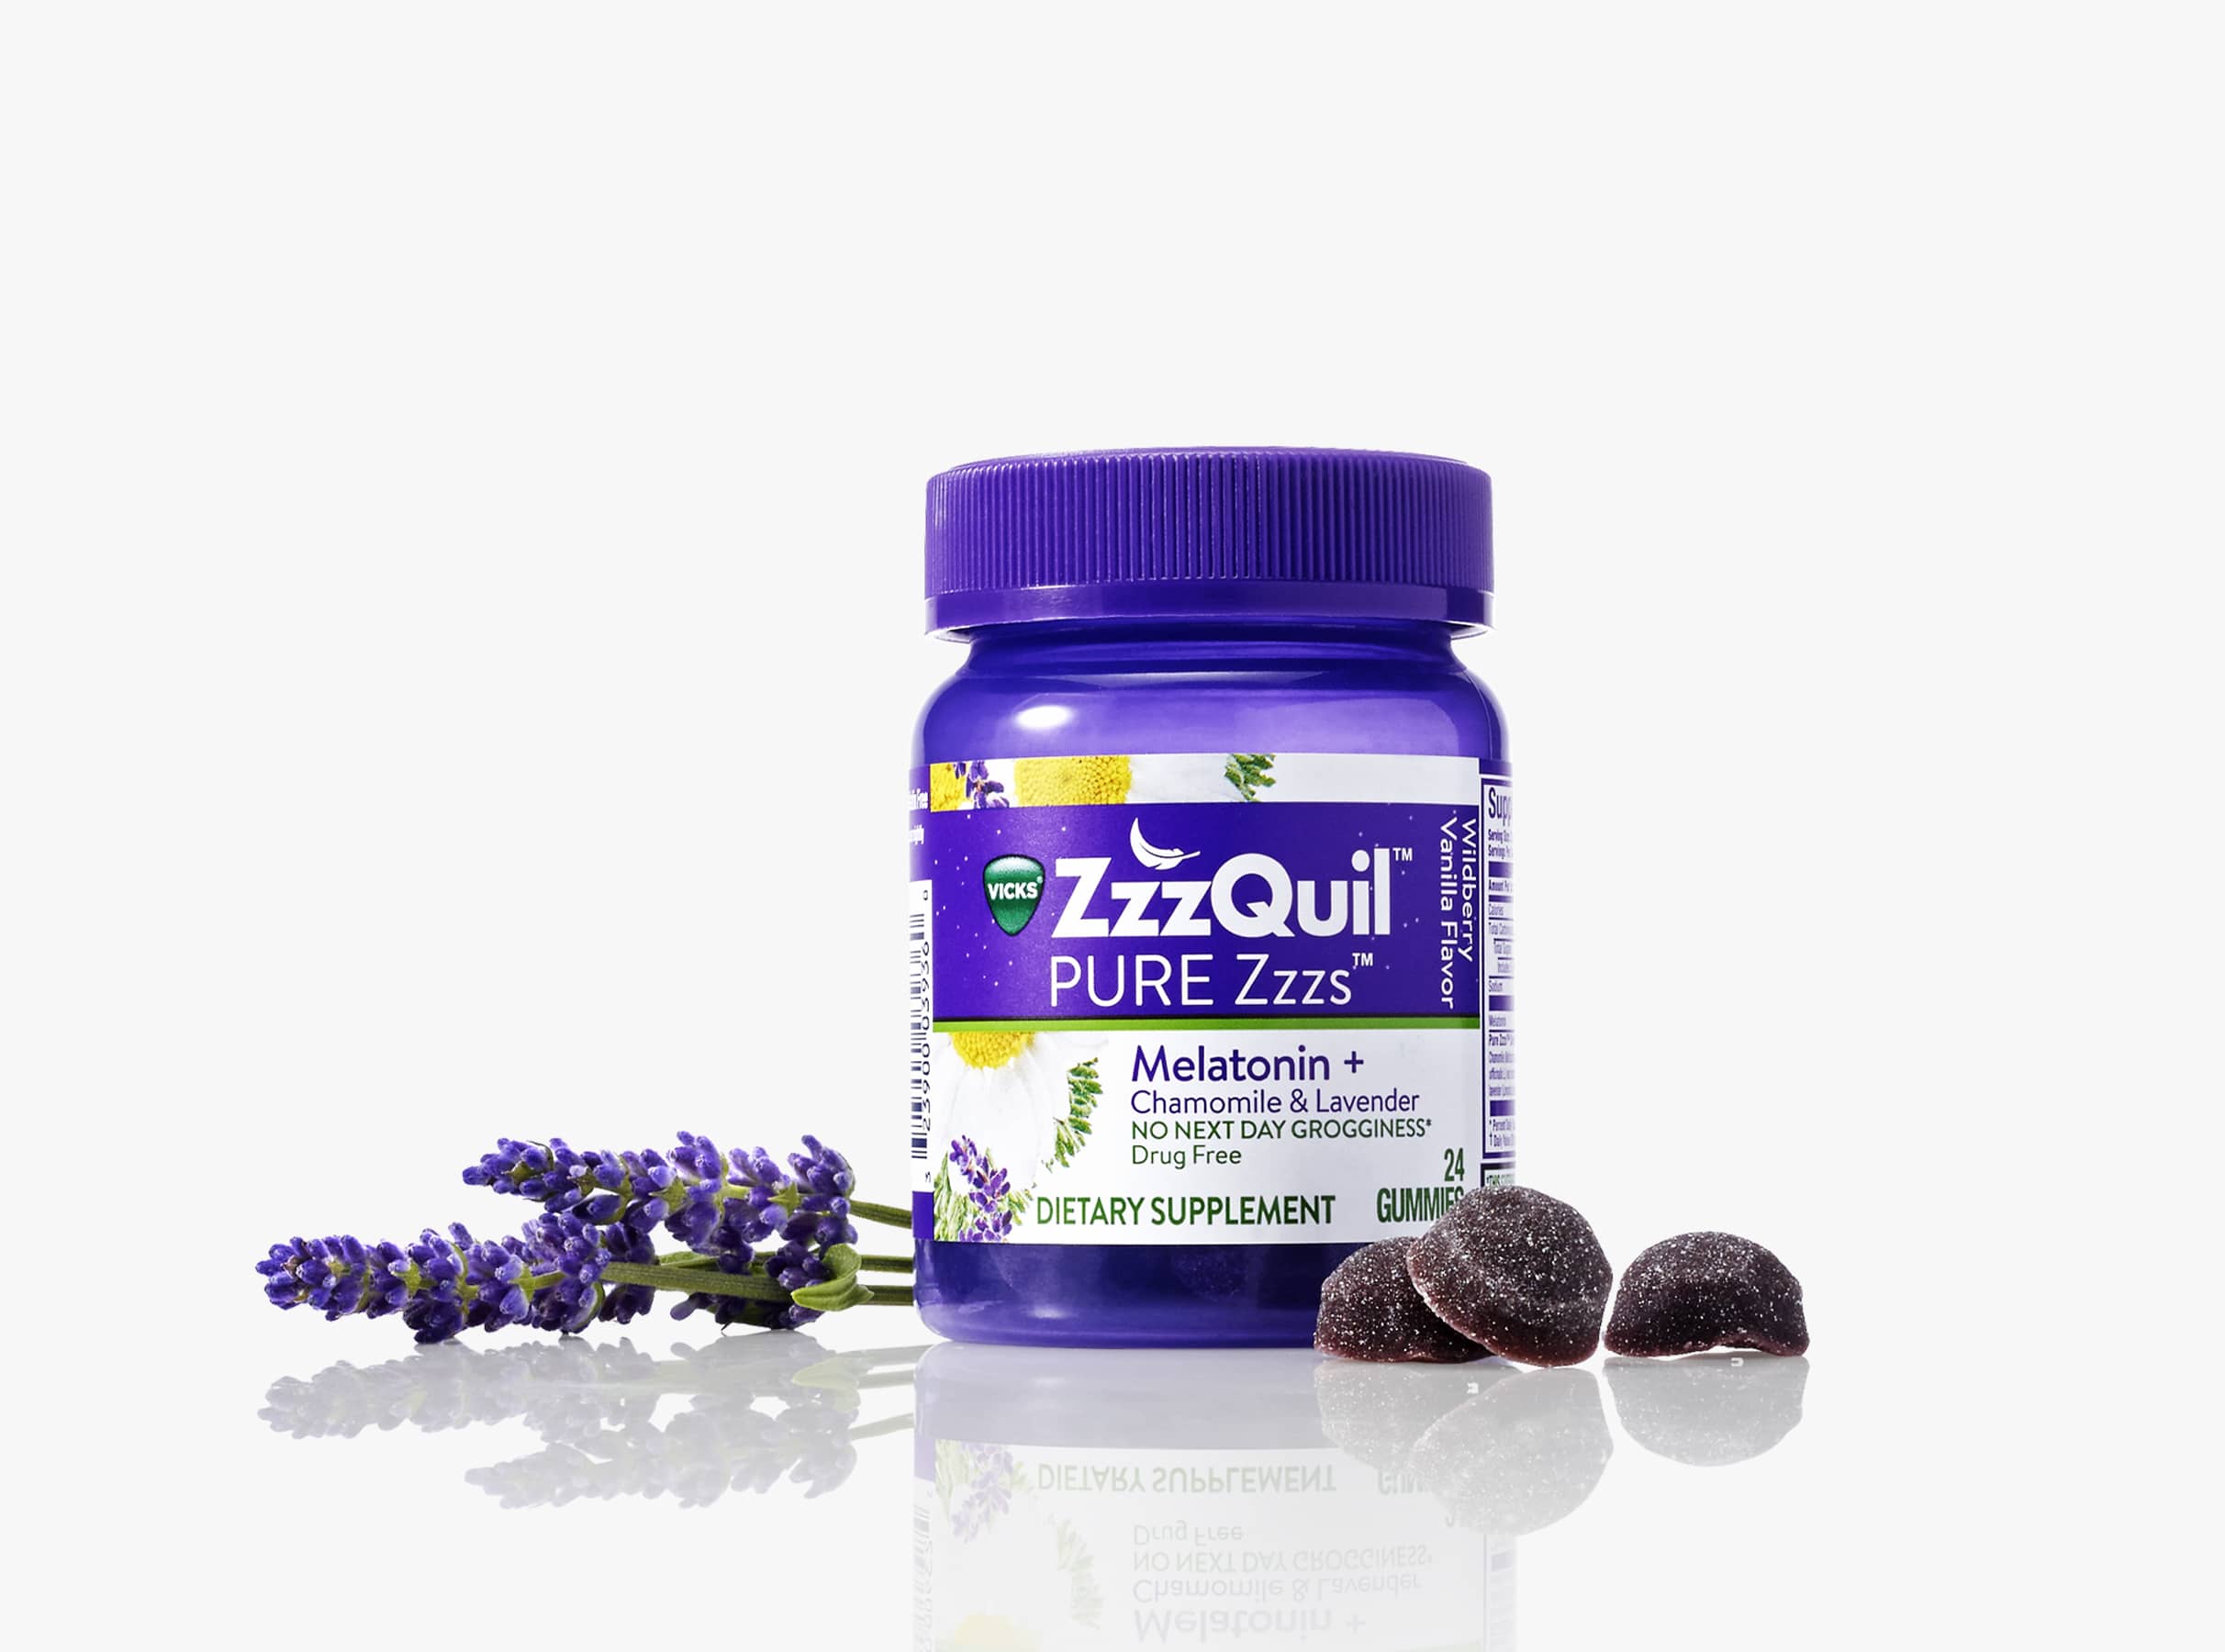 Shop for sleep loss relief products, showing Zzzquil® brand melatonin example